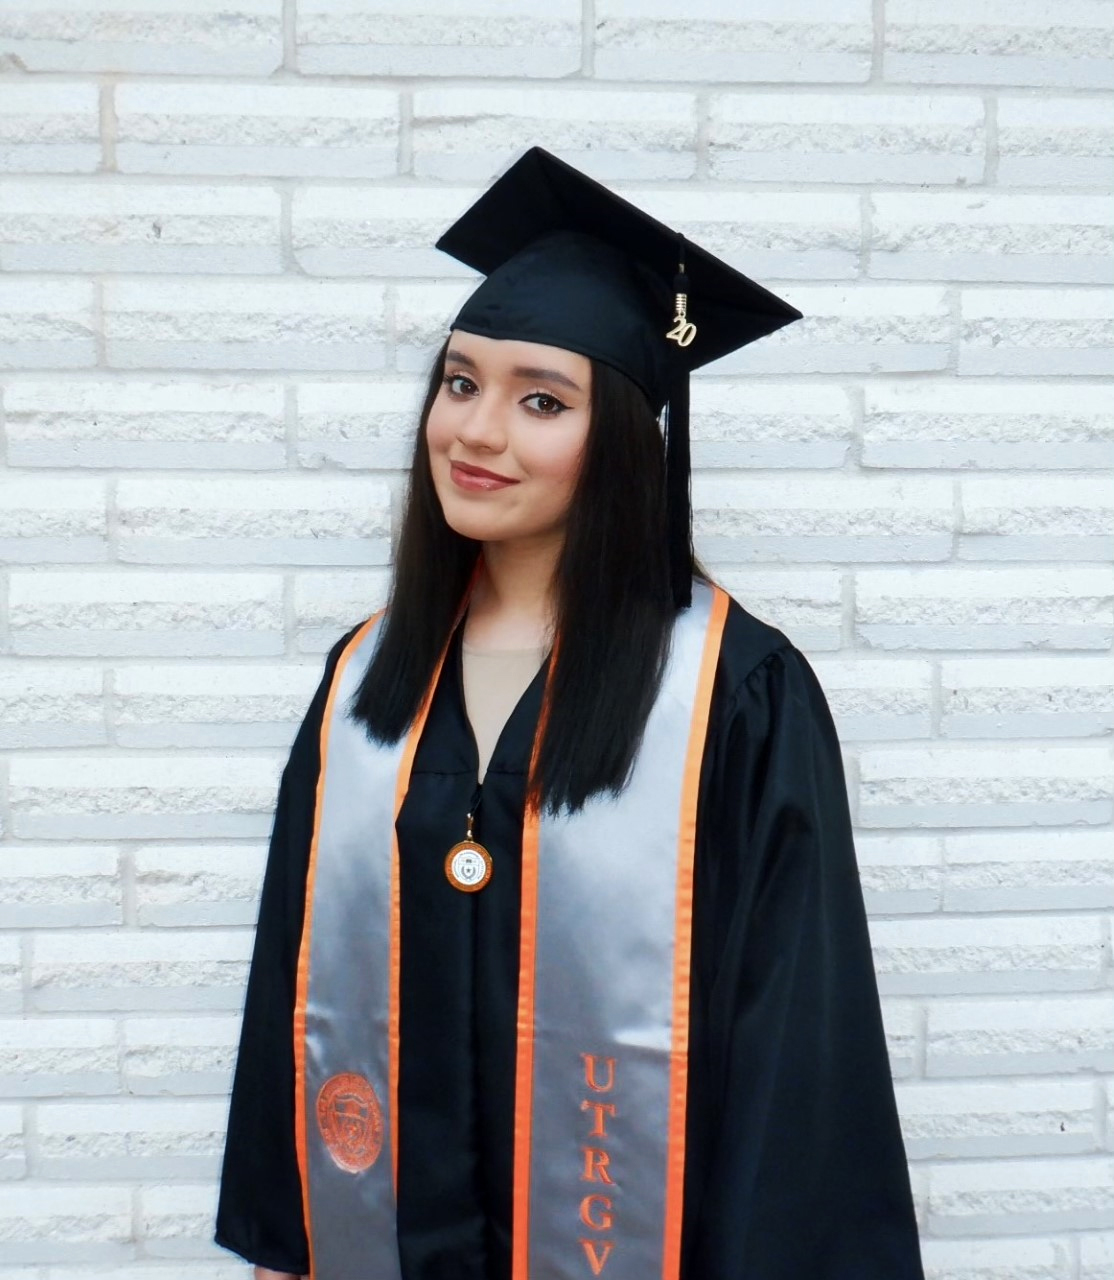 From McAllen, Clarissa Caballero earned a Bachelor of Business Administration in Marketing degree with a minor in Graphic Design. She is hoping her skills will land her a marketing job with a top gaming company. (Courtesy Photo)